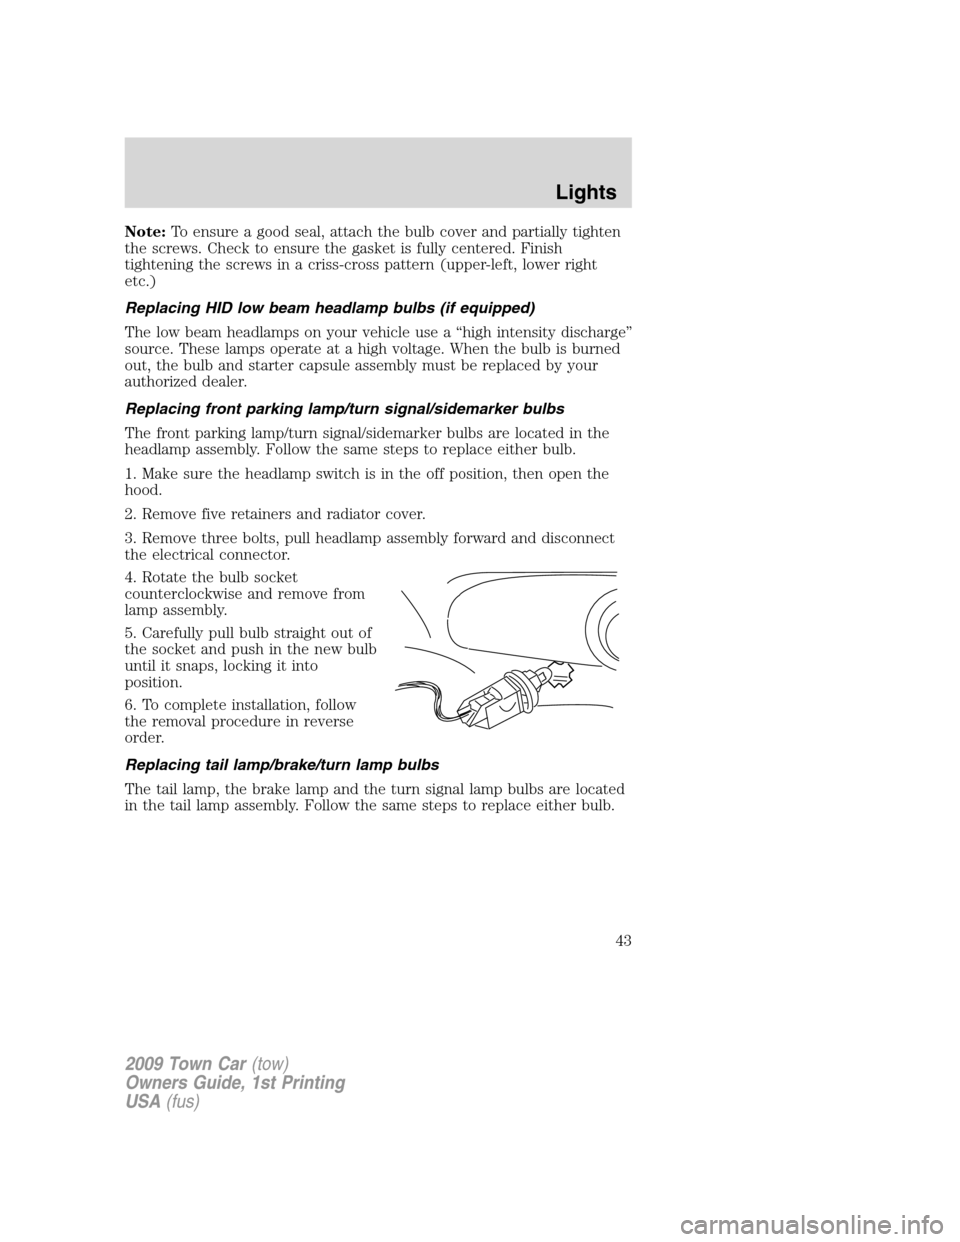 LINCOLN TOWN CAR 2009  Owners Manual Note:To ensure a good seal, attach the bulb cover and partially tighten
the screws. Check to ensure the gasket is fully centered. Finish
tightening the screws in a criss-cross pattern (upper-left, low